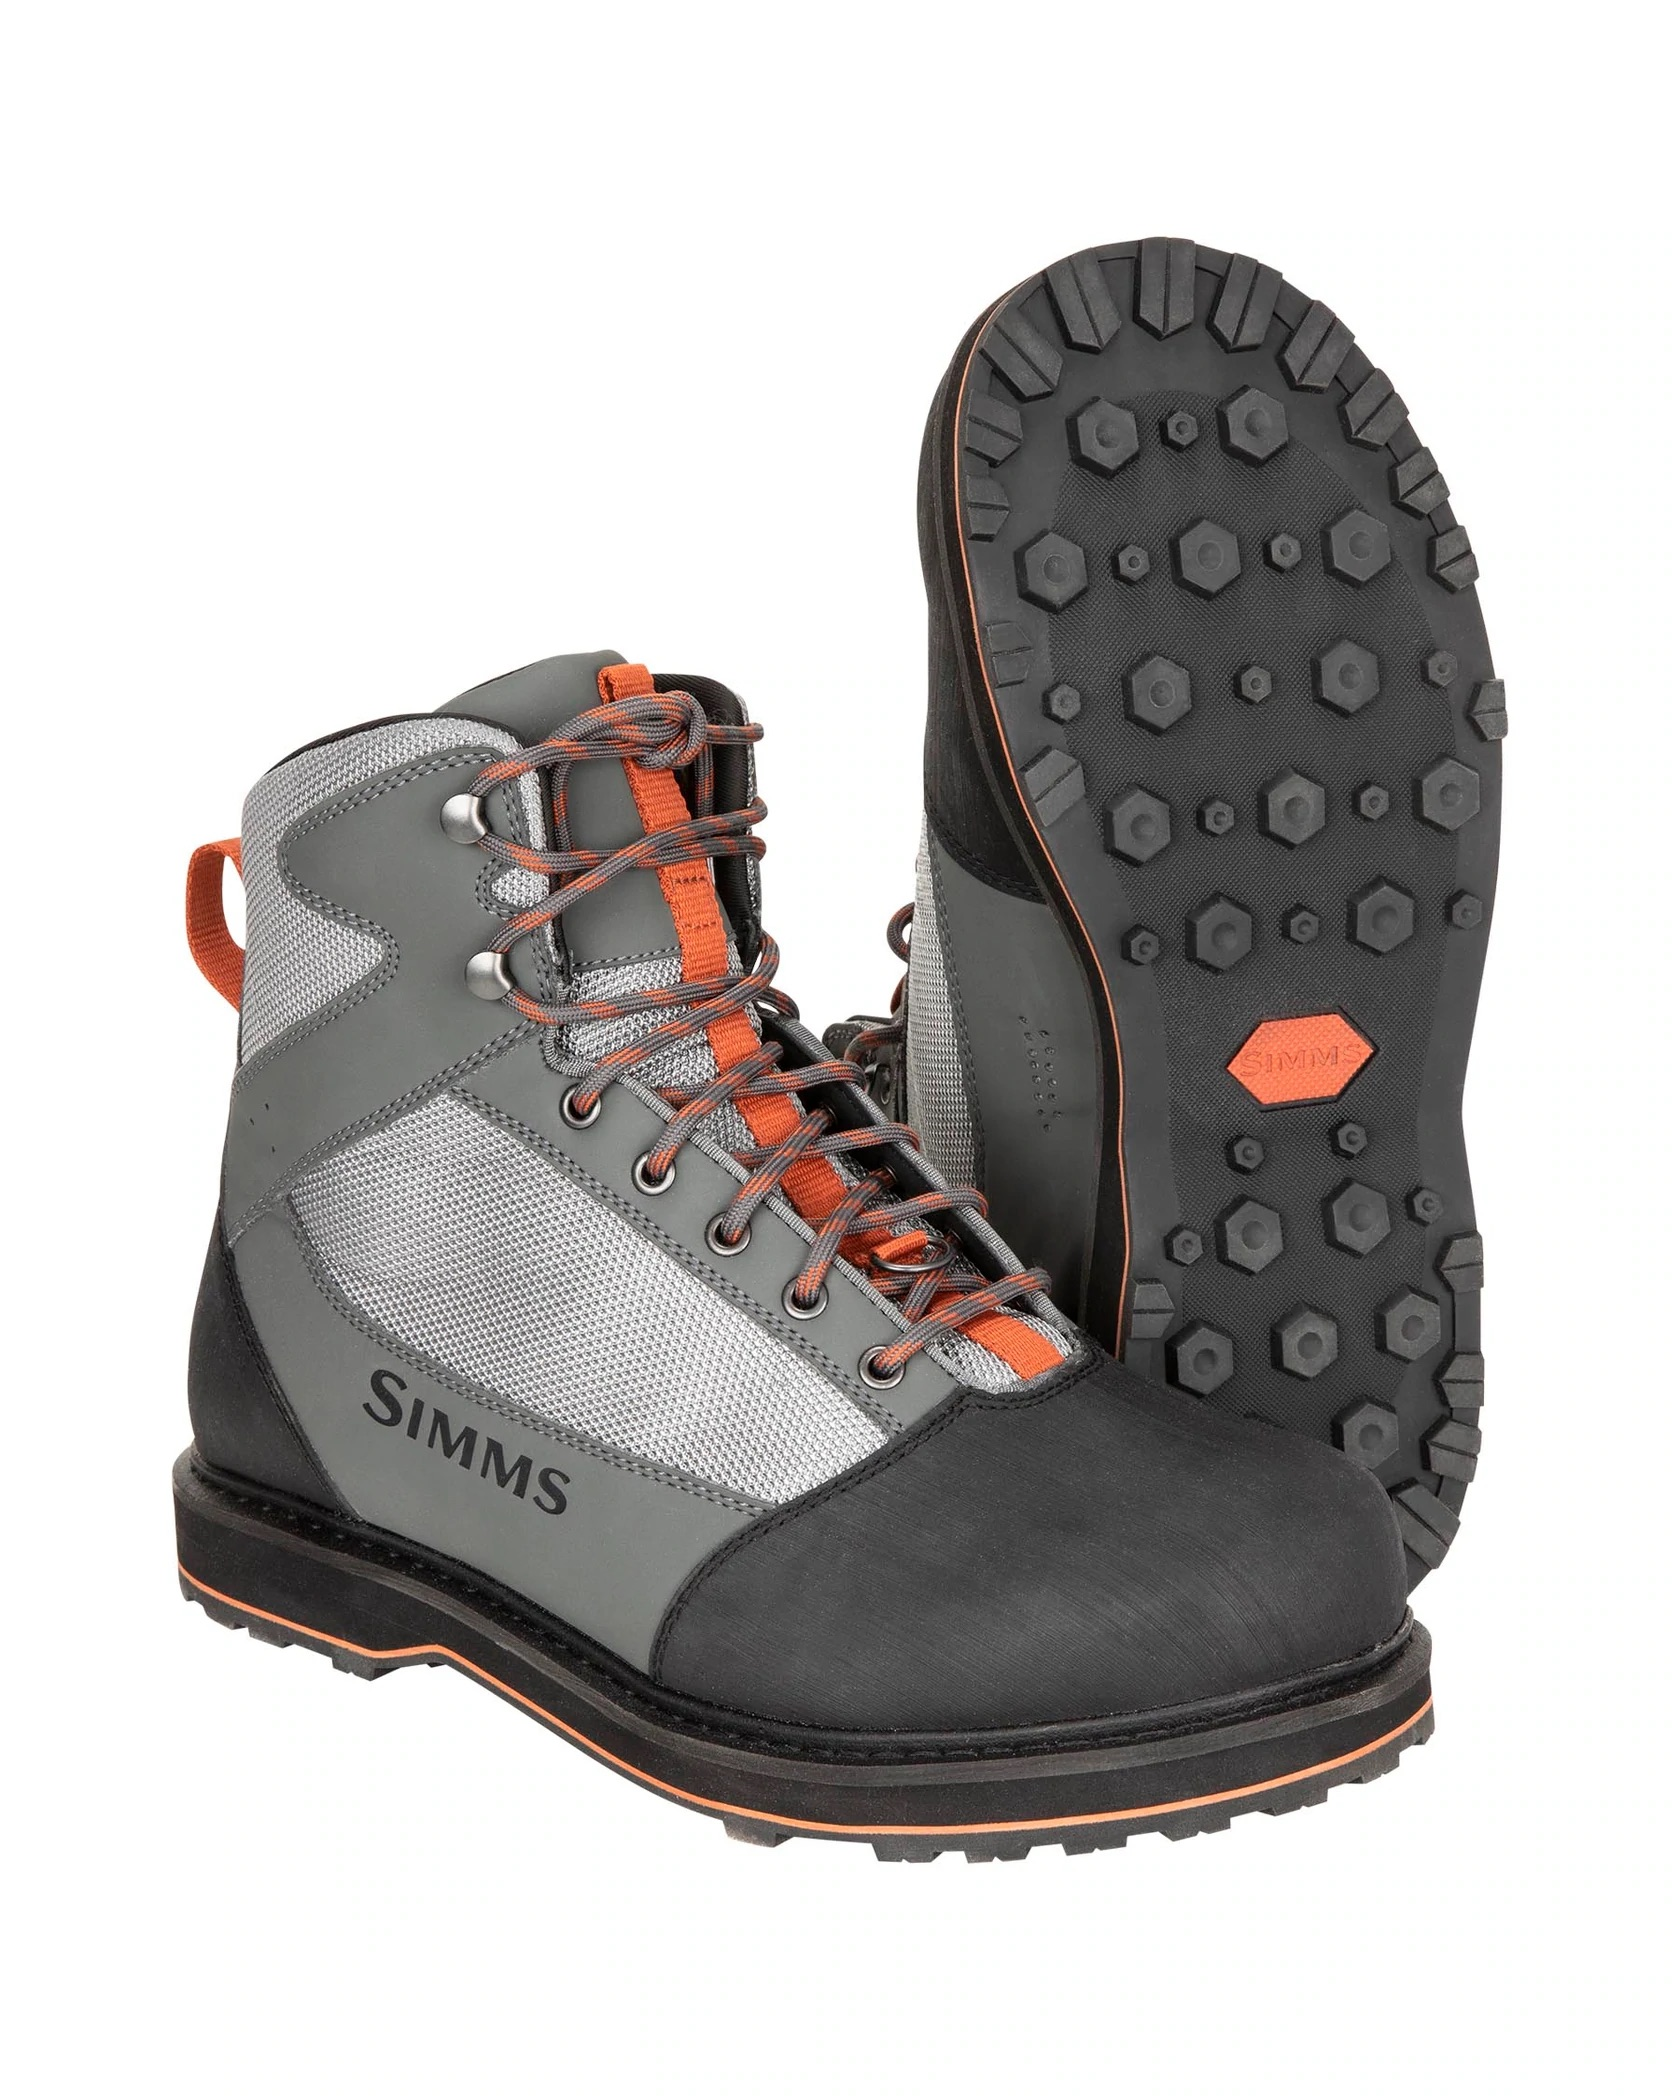 Simms Tributary Boot - Rubber - Size 4